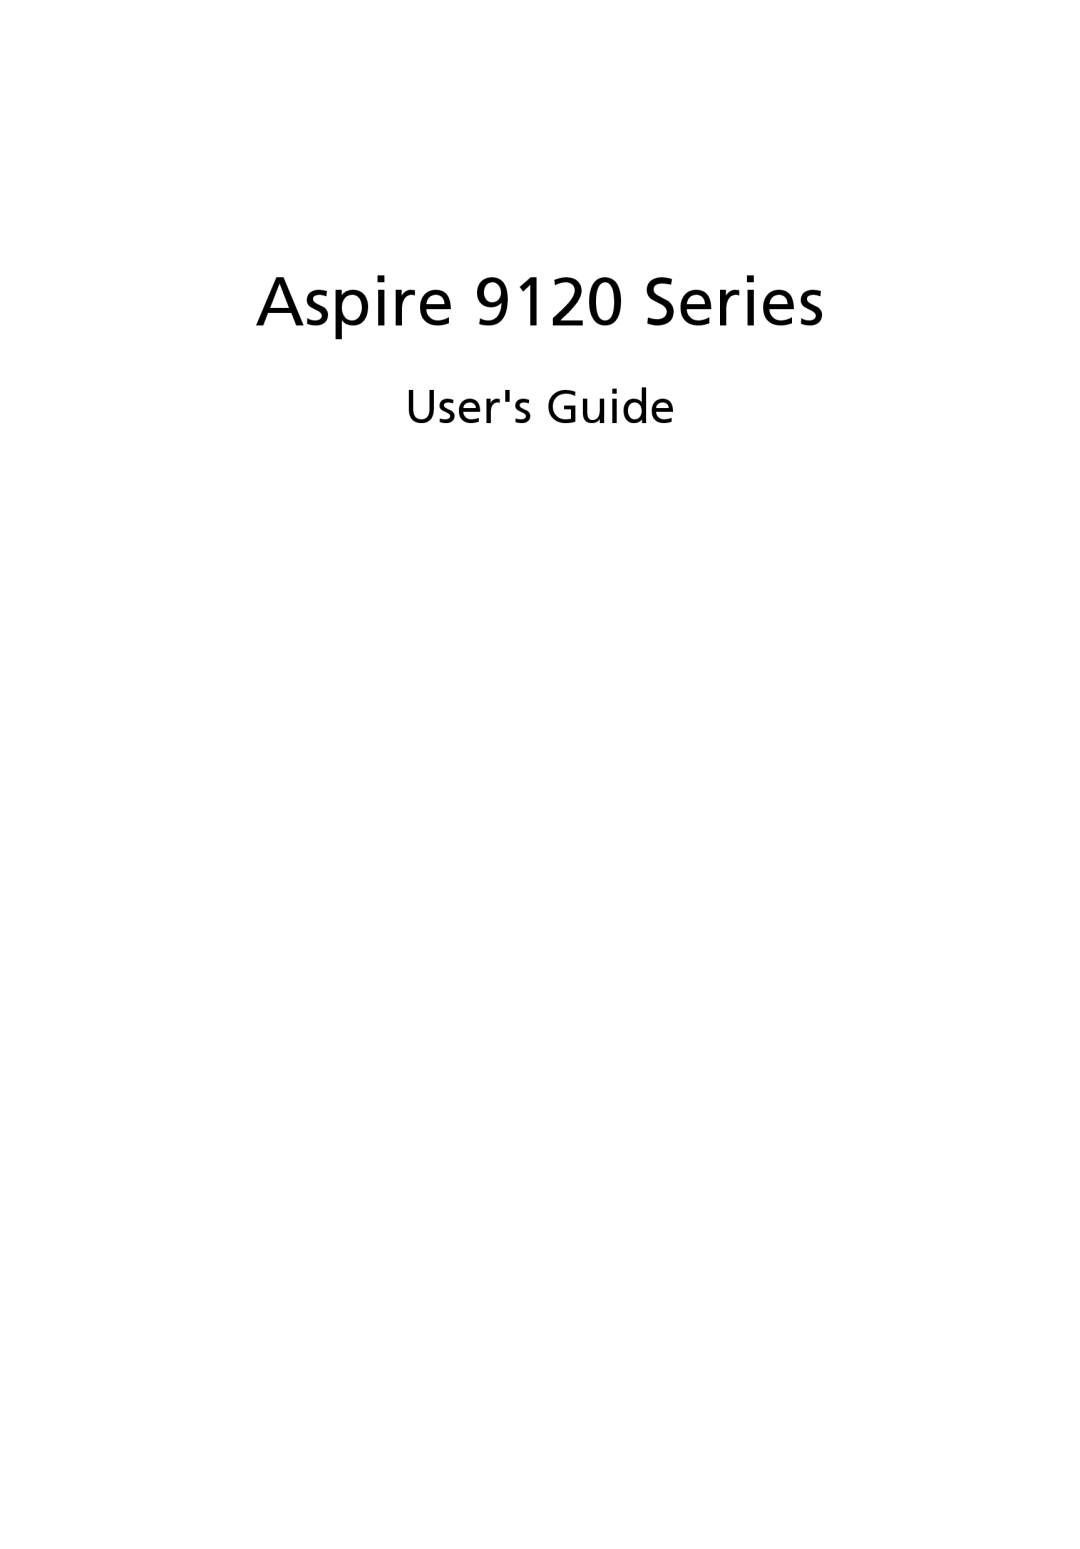 Acer manual Users Guide, Aspire 9120 Series 